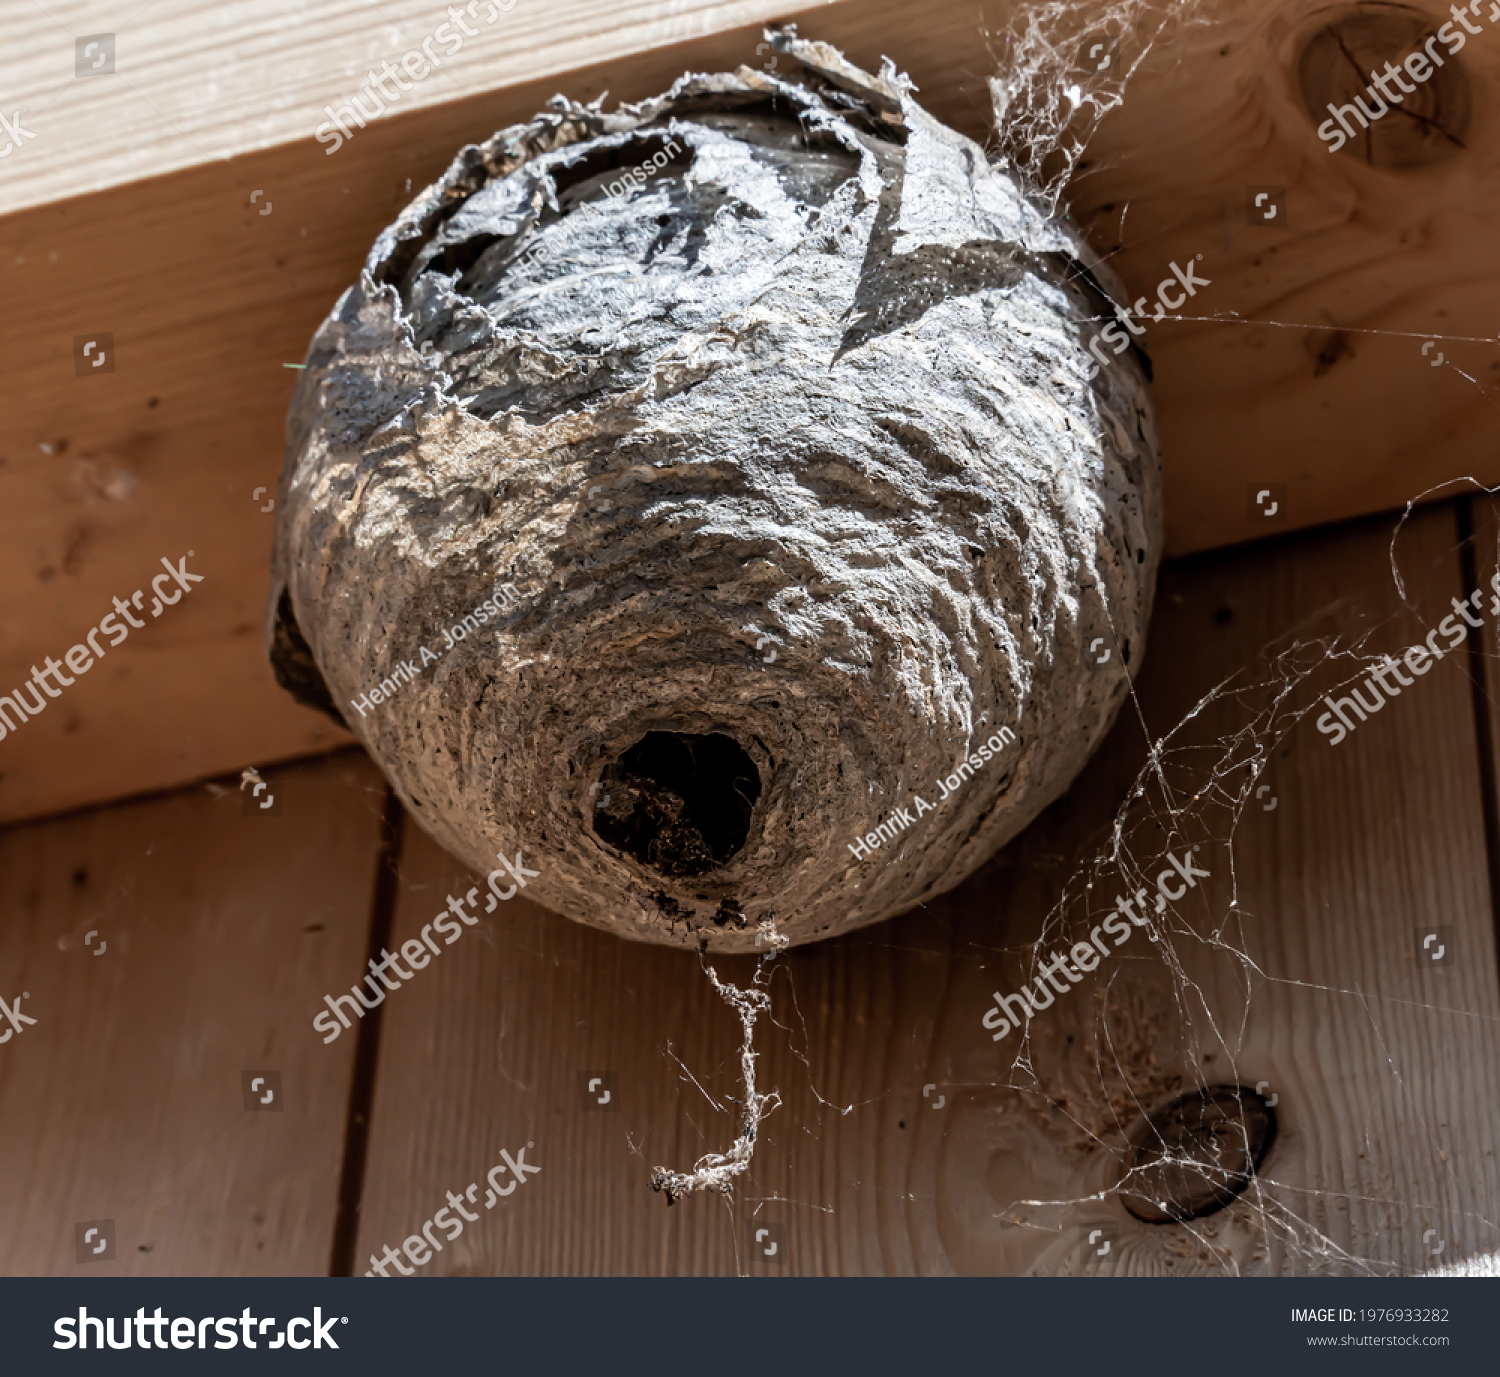 Hornet wasps nest on the inside frame of a house wall. Pest control work. Close up. #1976933282